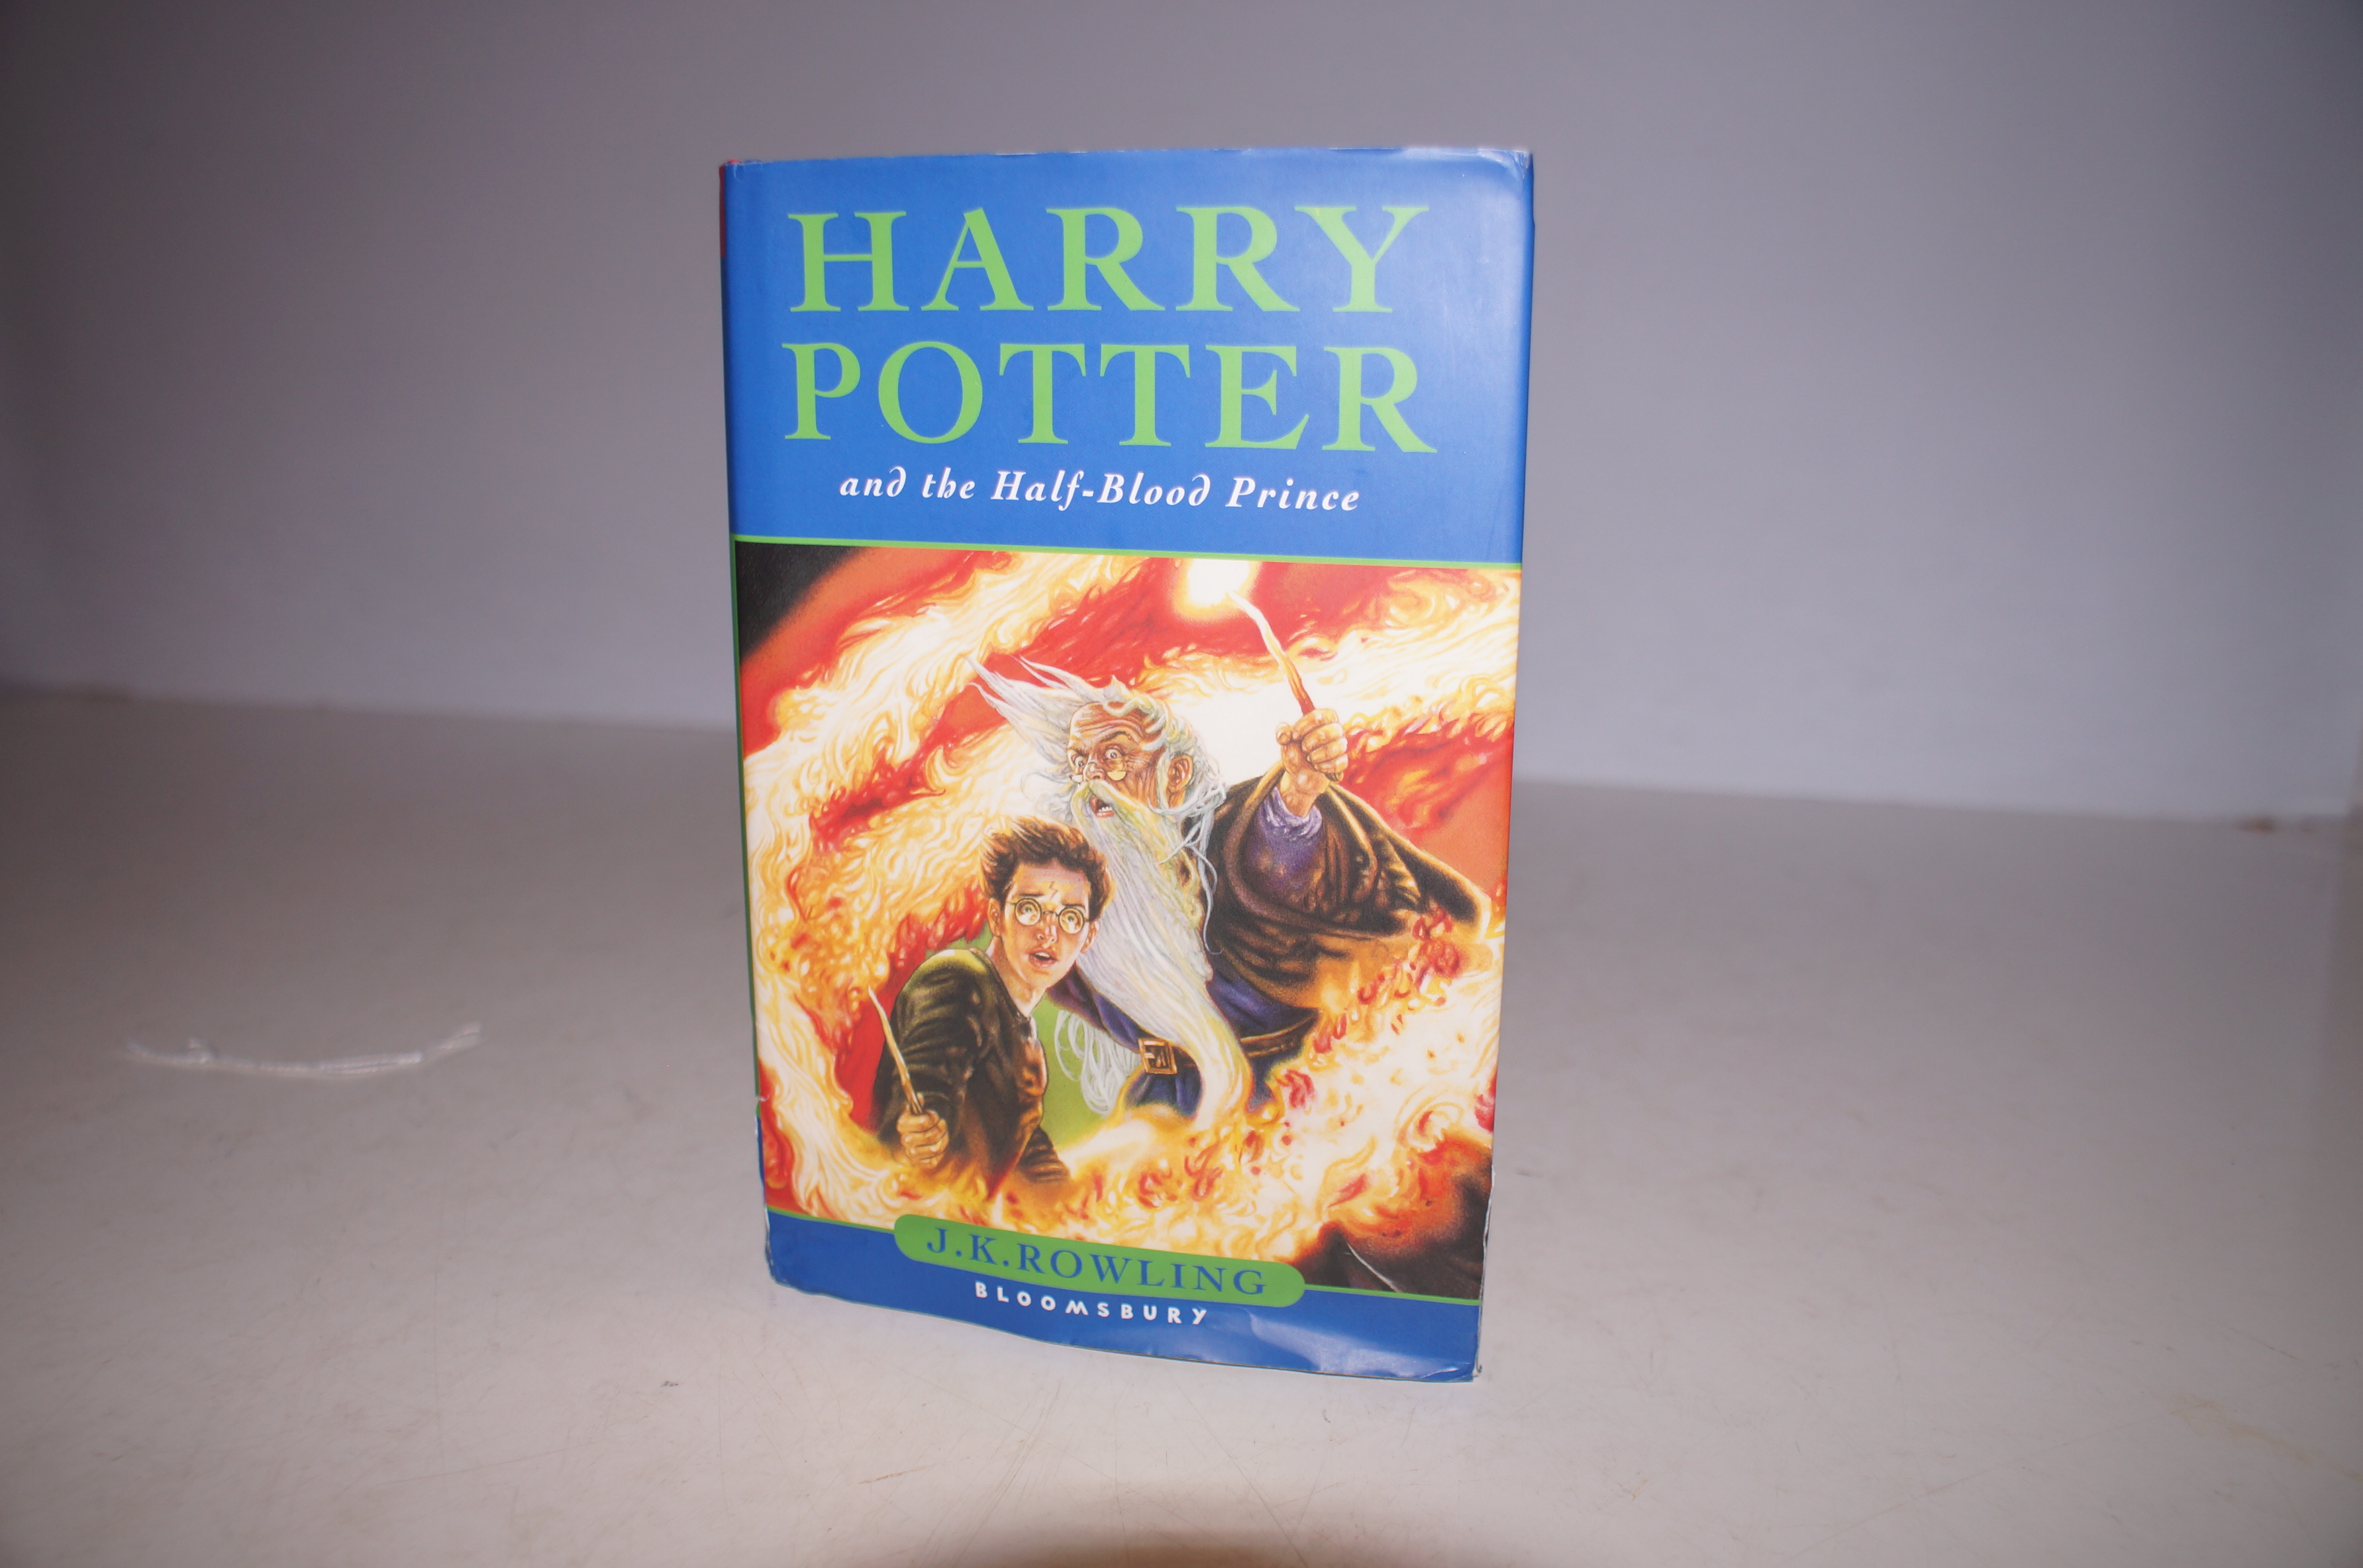 Harry Potter and the half blood prince first edition book. A rare copy with a printing error on page